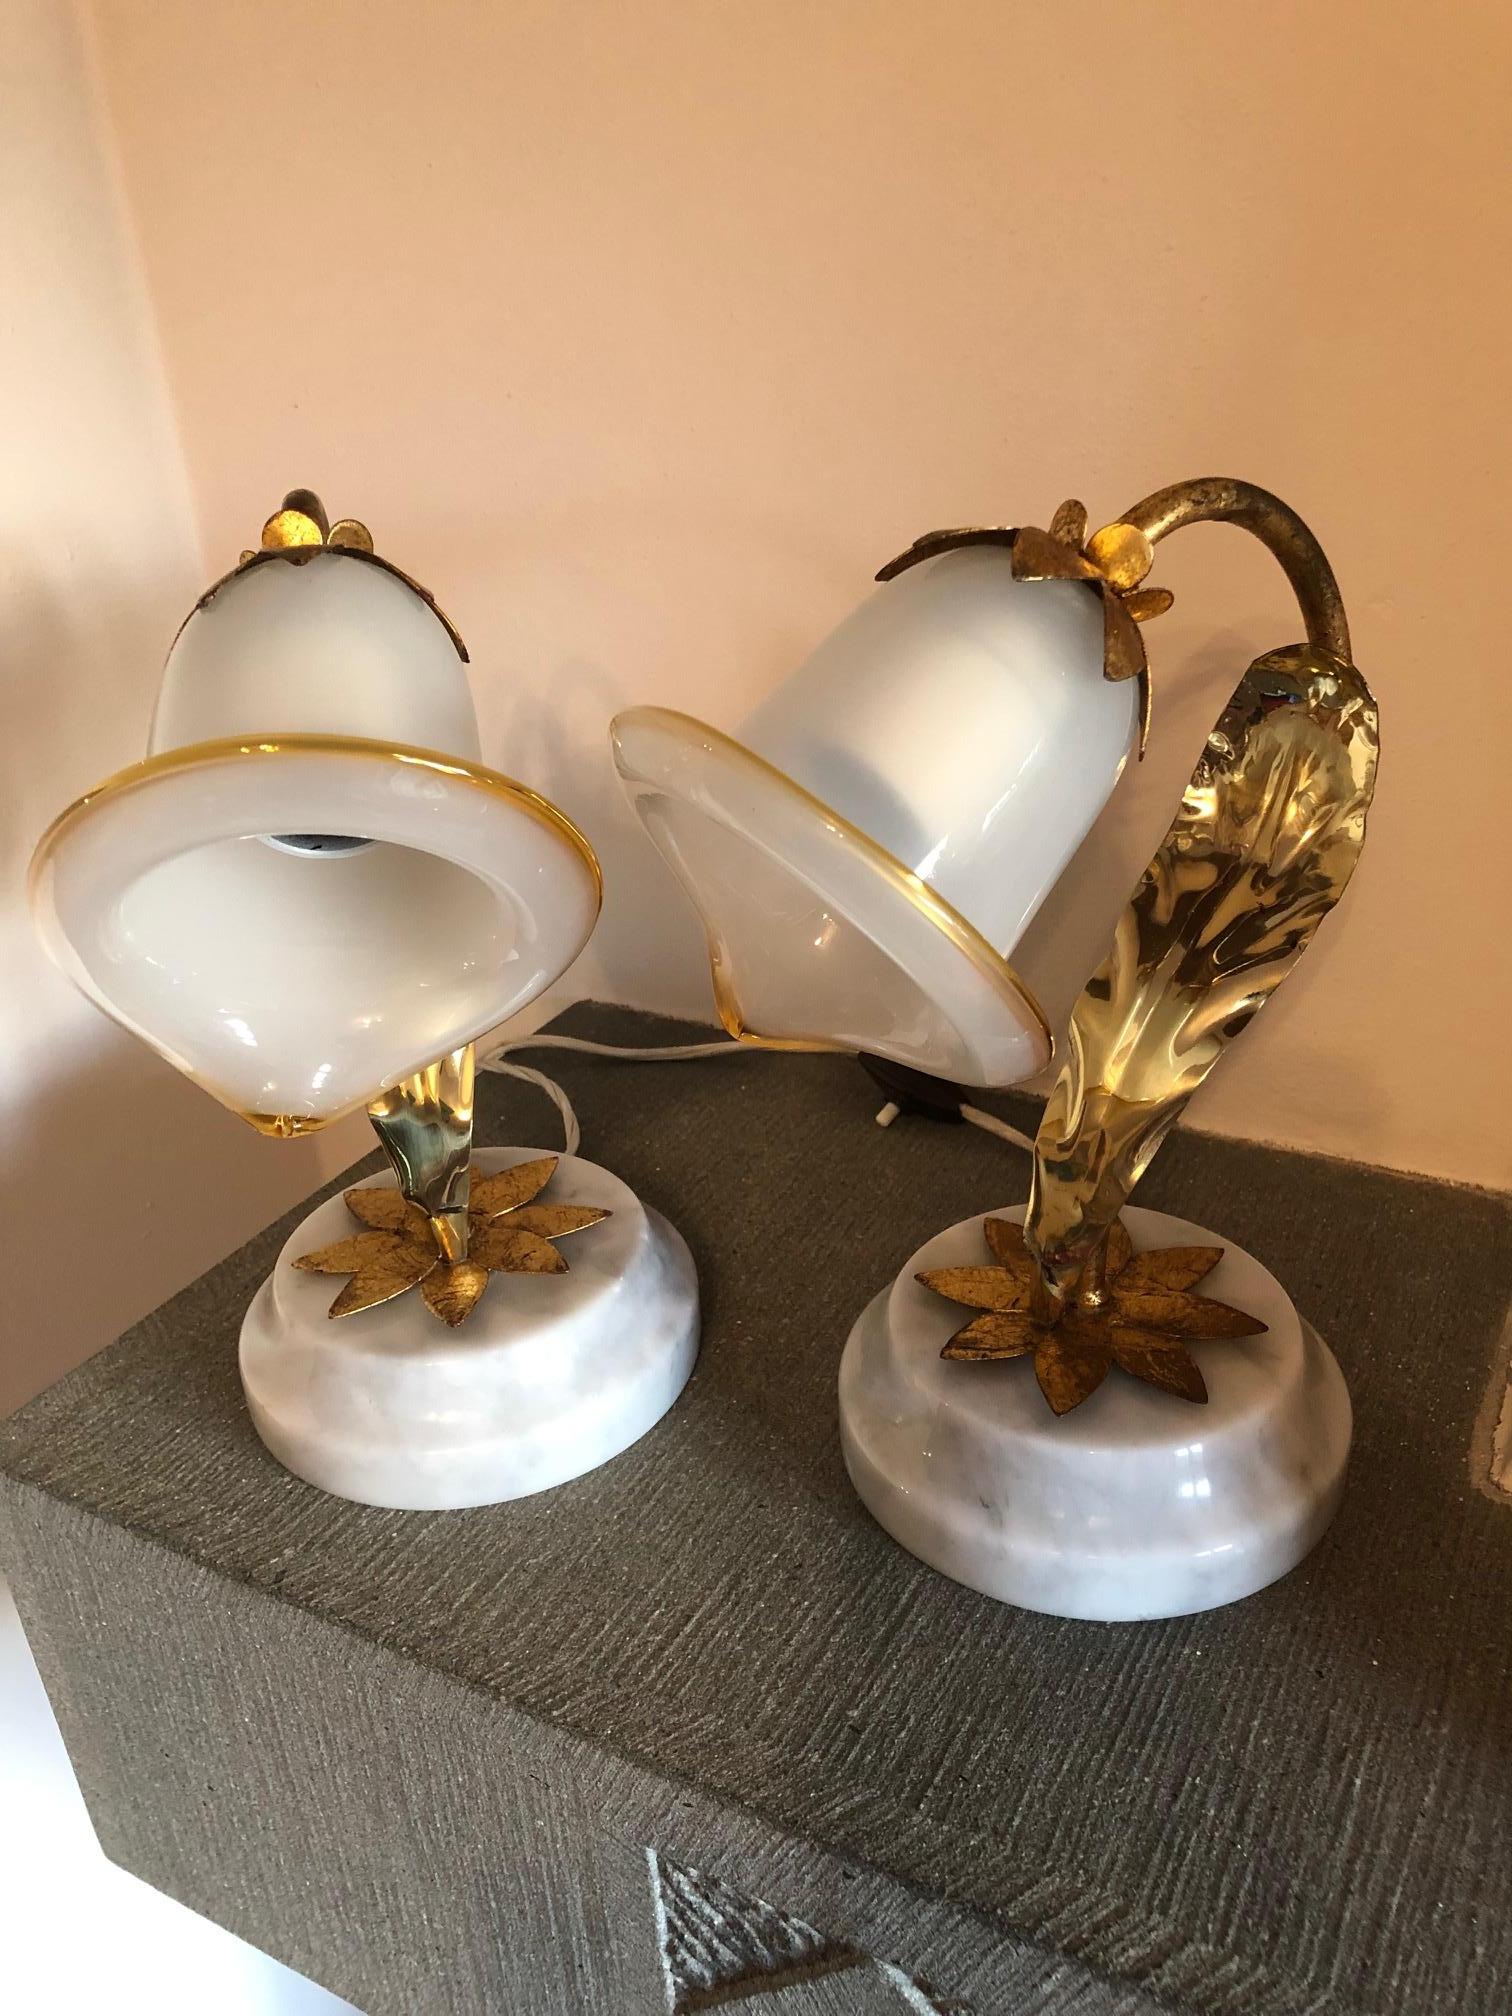 Pair of Italian table lamps with Carrara marble base.
The wiring of the wires and the plug are those of the time.
At the moment they work with 220V and lamps with E27 socket types, I recommend using a 110/220V adapter.
They have no obvious